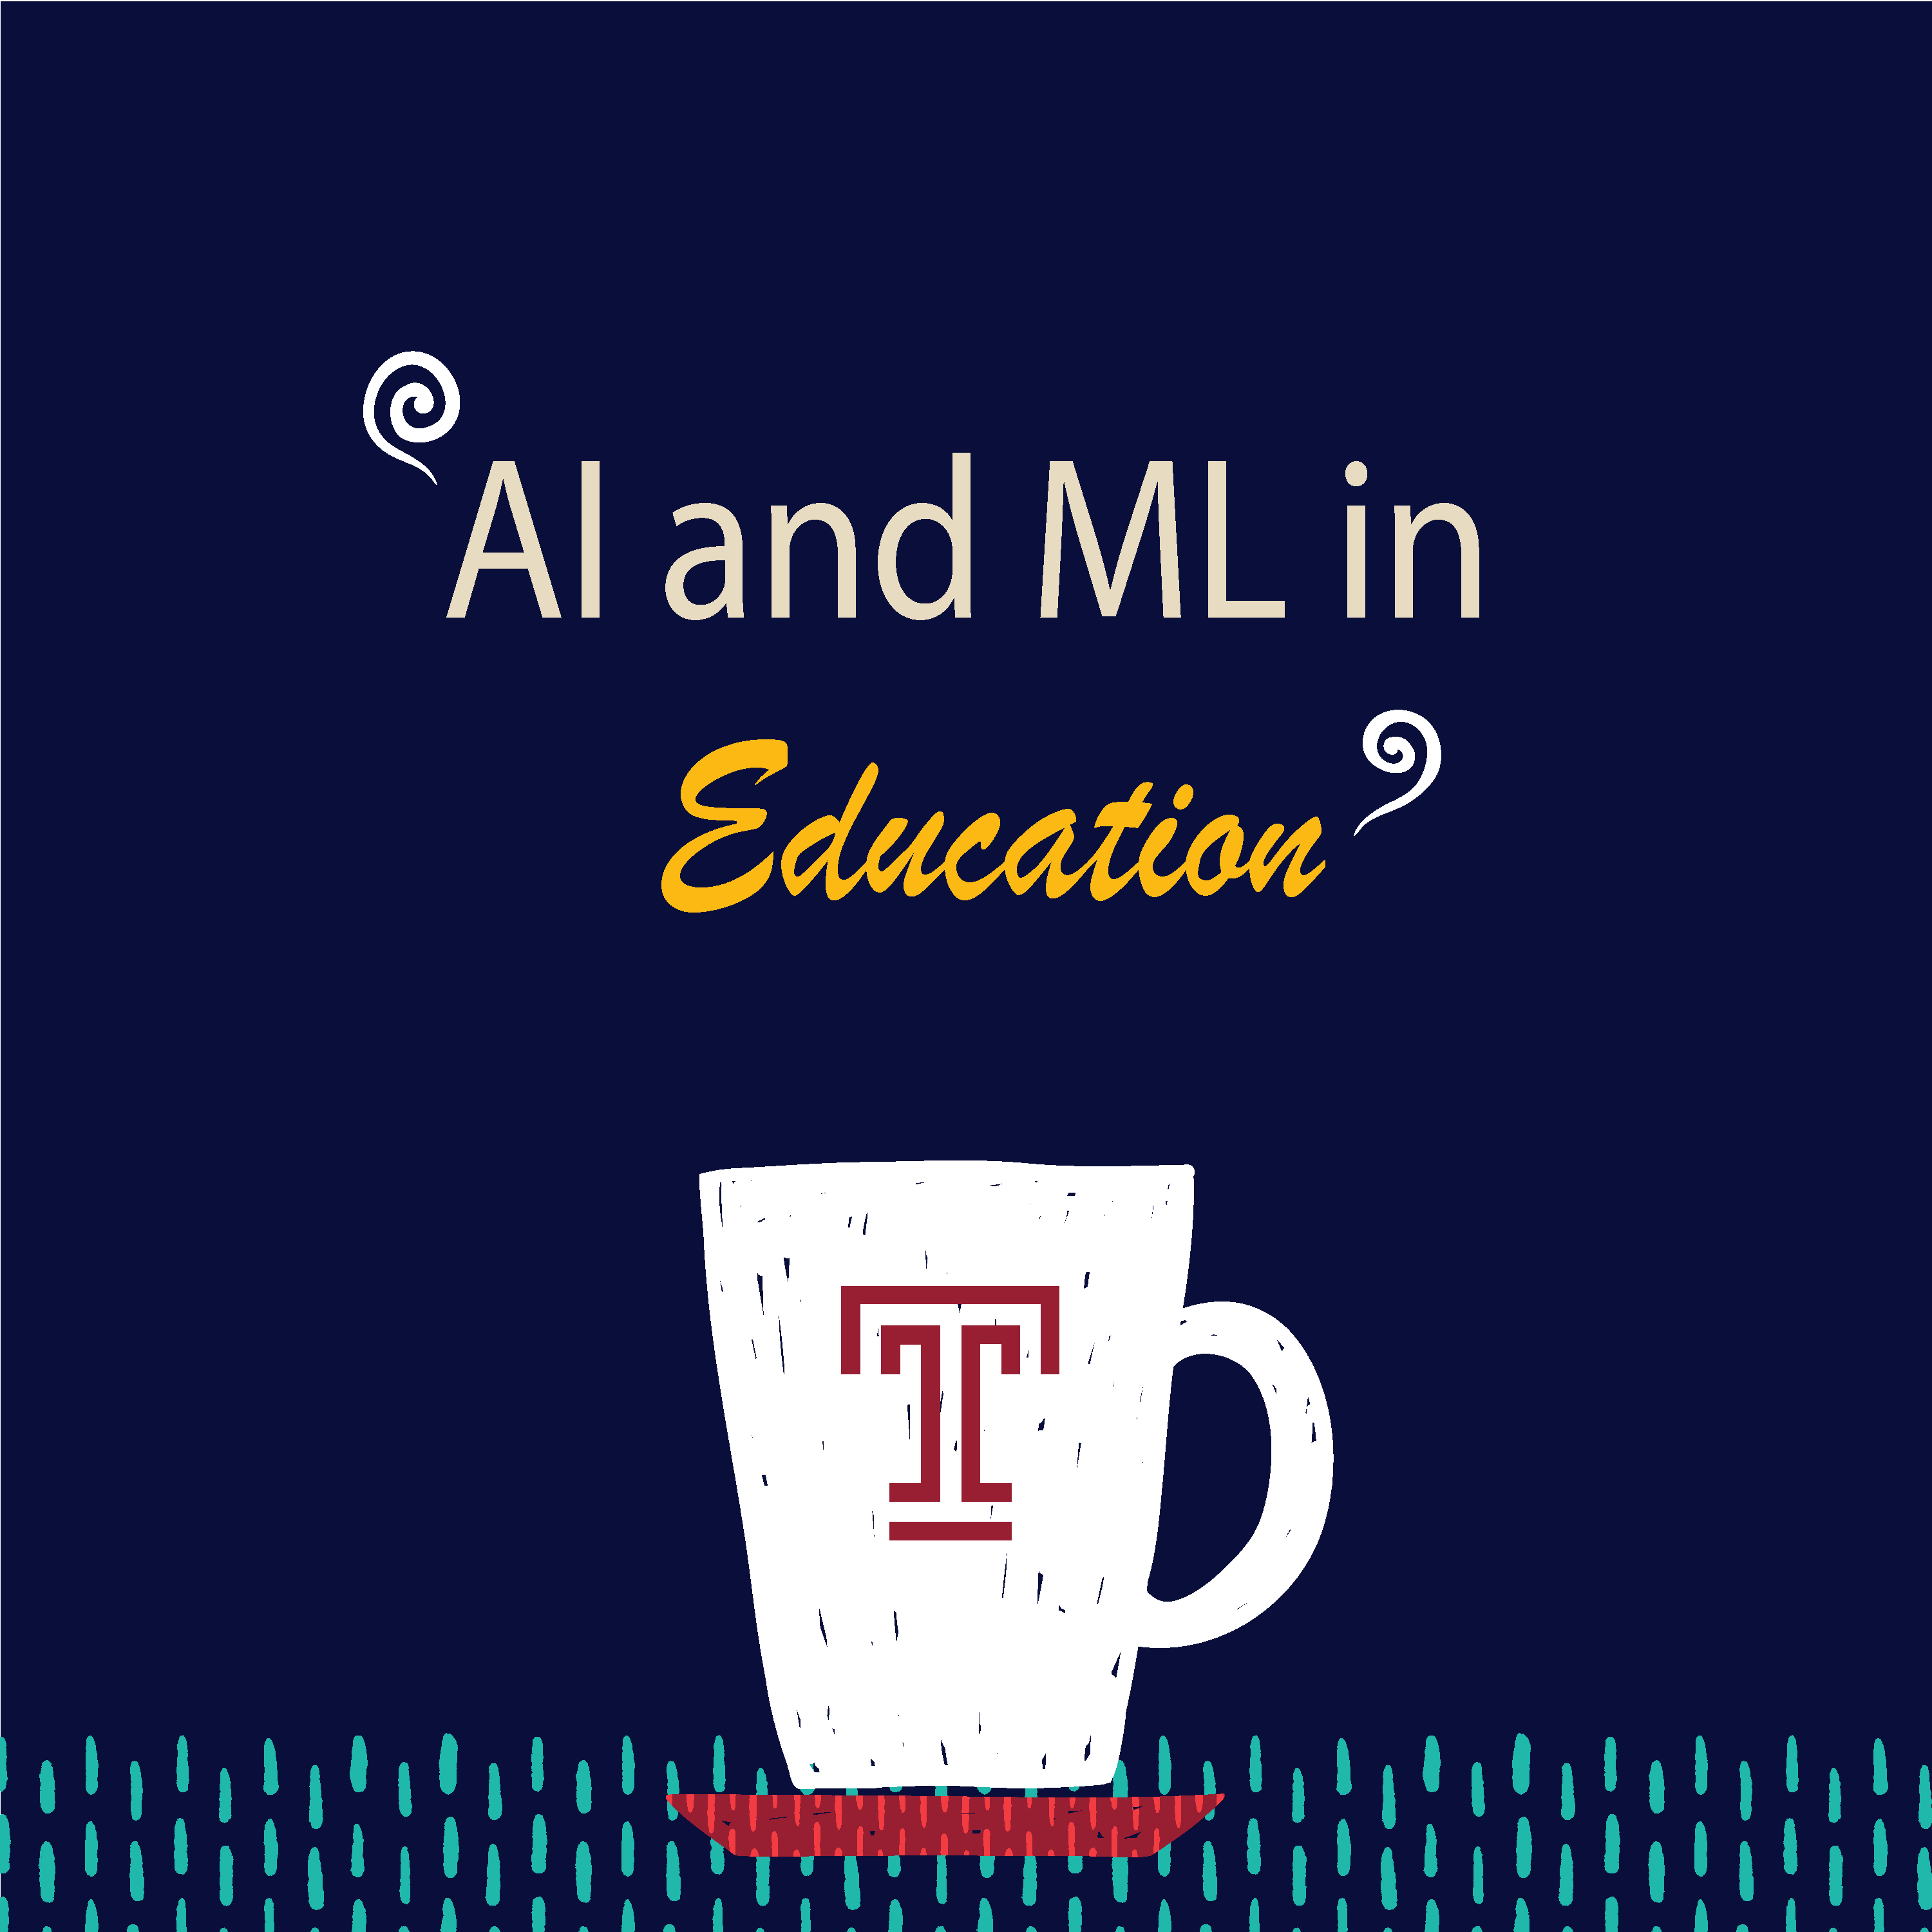 AI and ML in Education